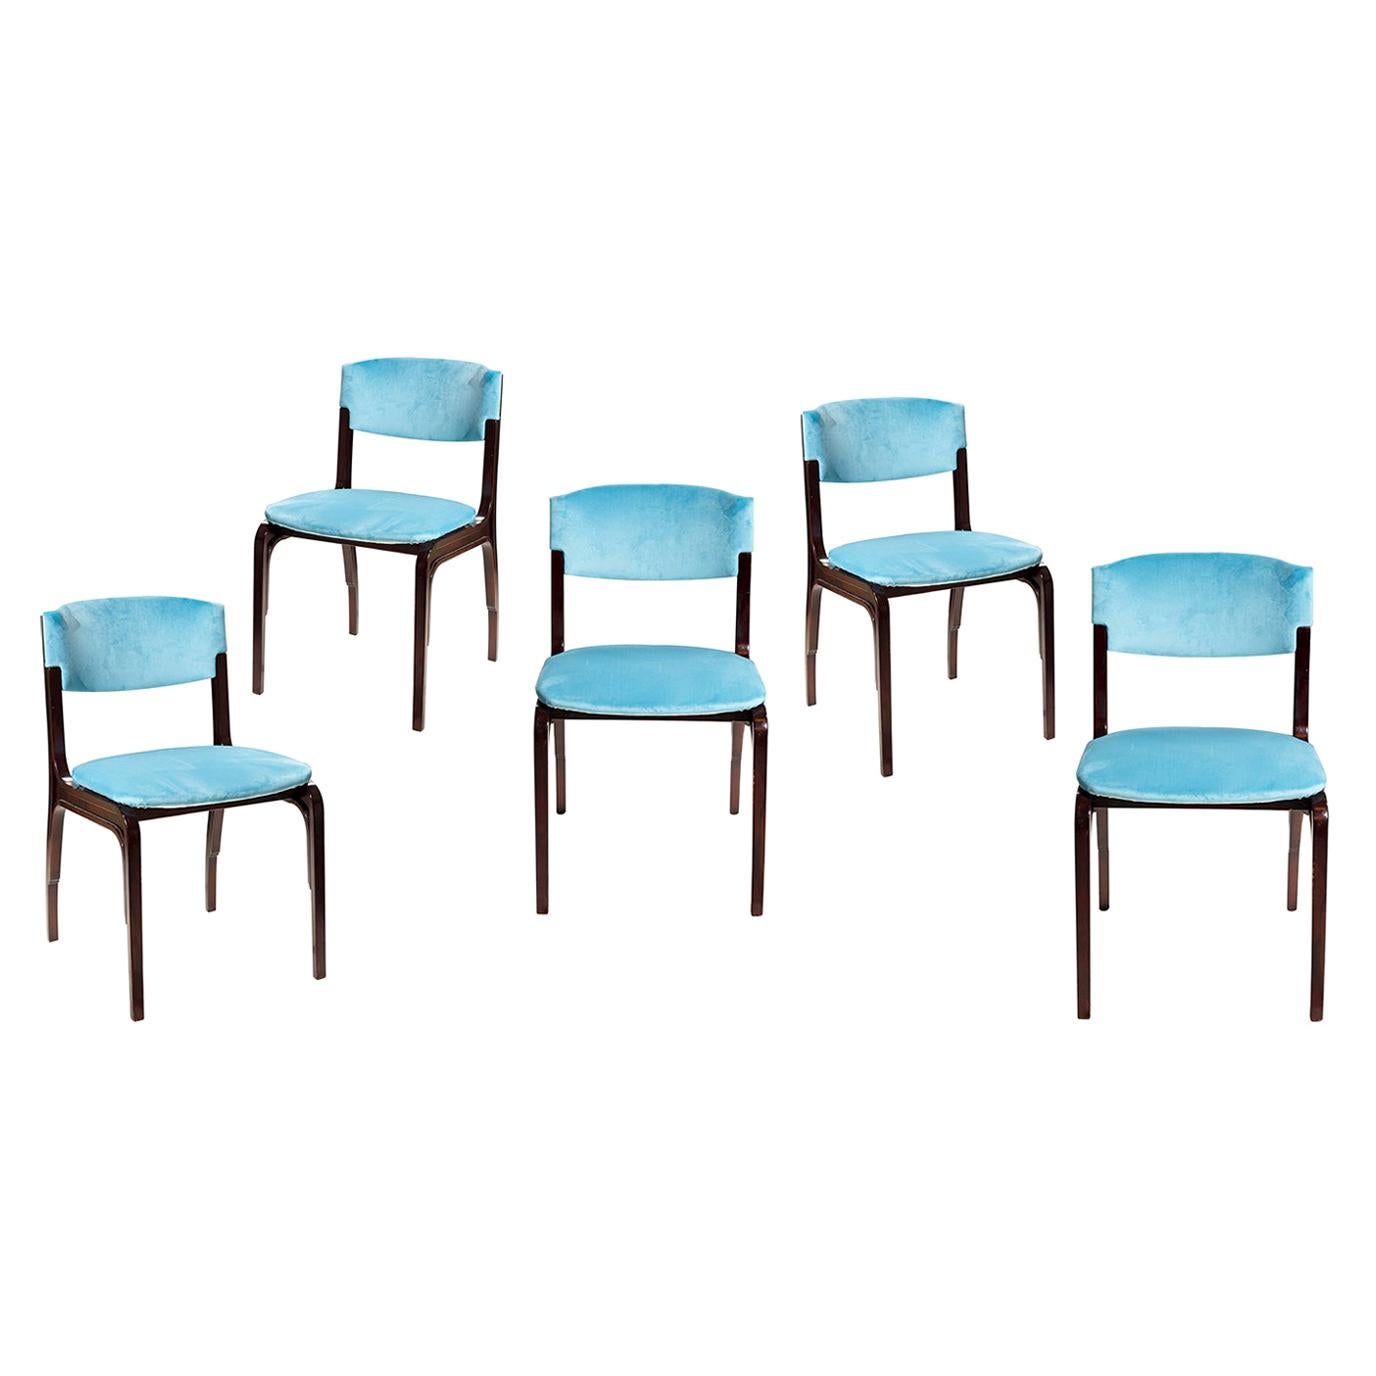 G.F. Frattini 5 Blue Velvet Chairs Mid-Century Modern From Cantieri Carugati For Sale